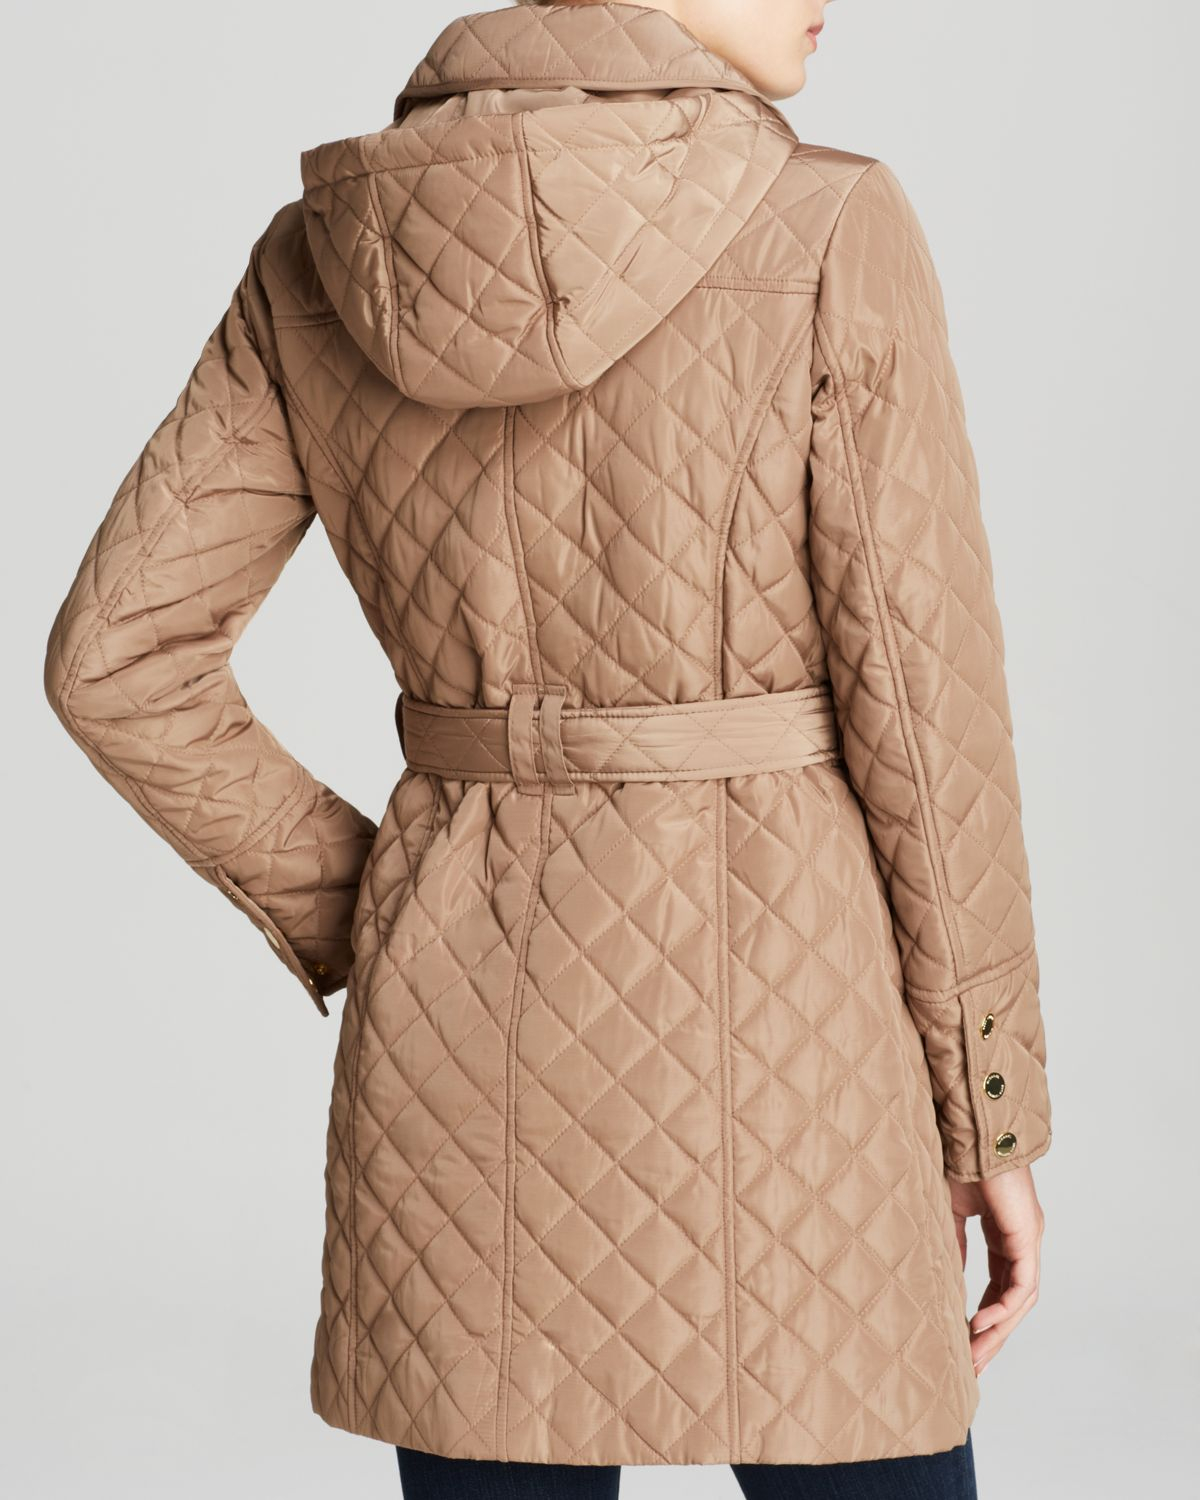 Lyst - Michael Michael Kors Coat - Missy Quilted Belted Trench in Brown